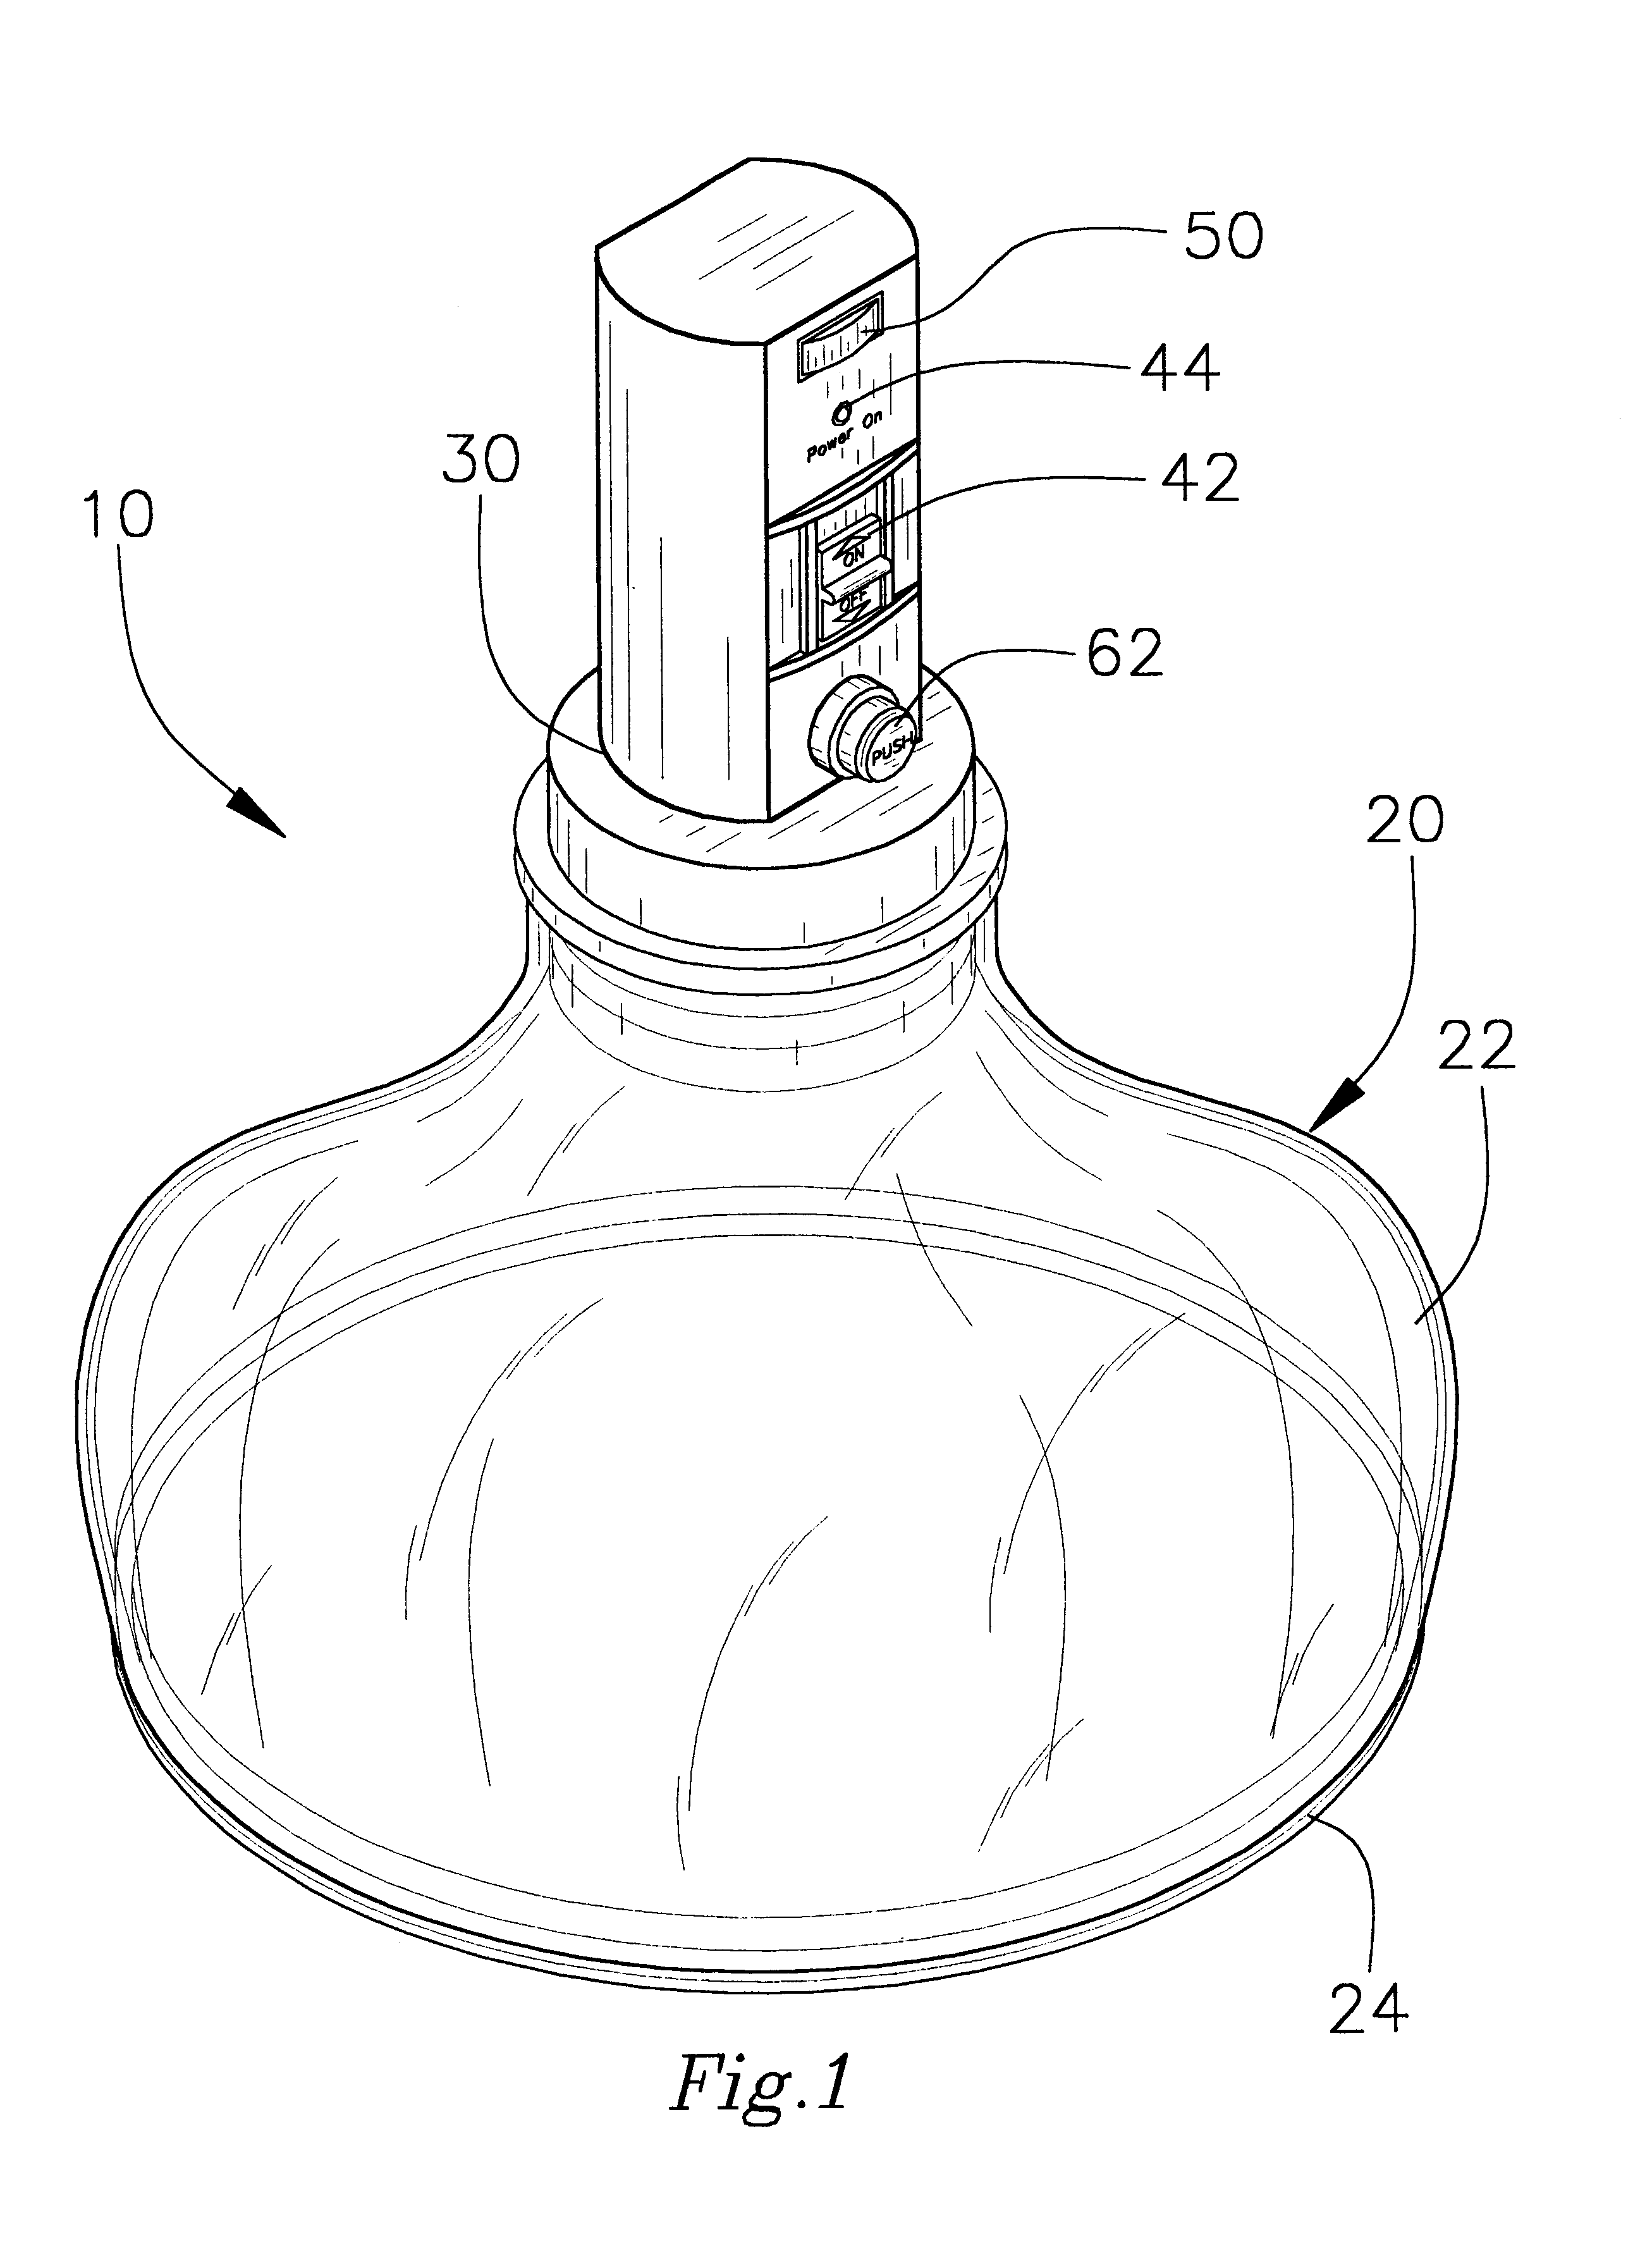 Apparatus for producing a hematoma